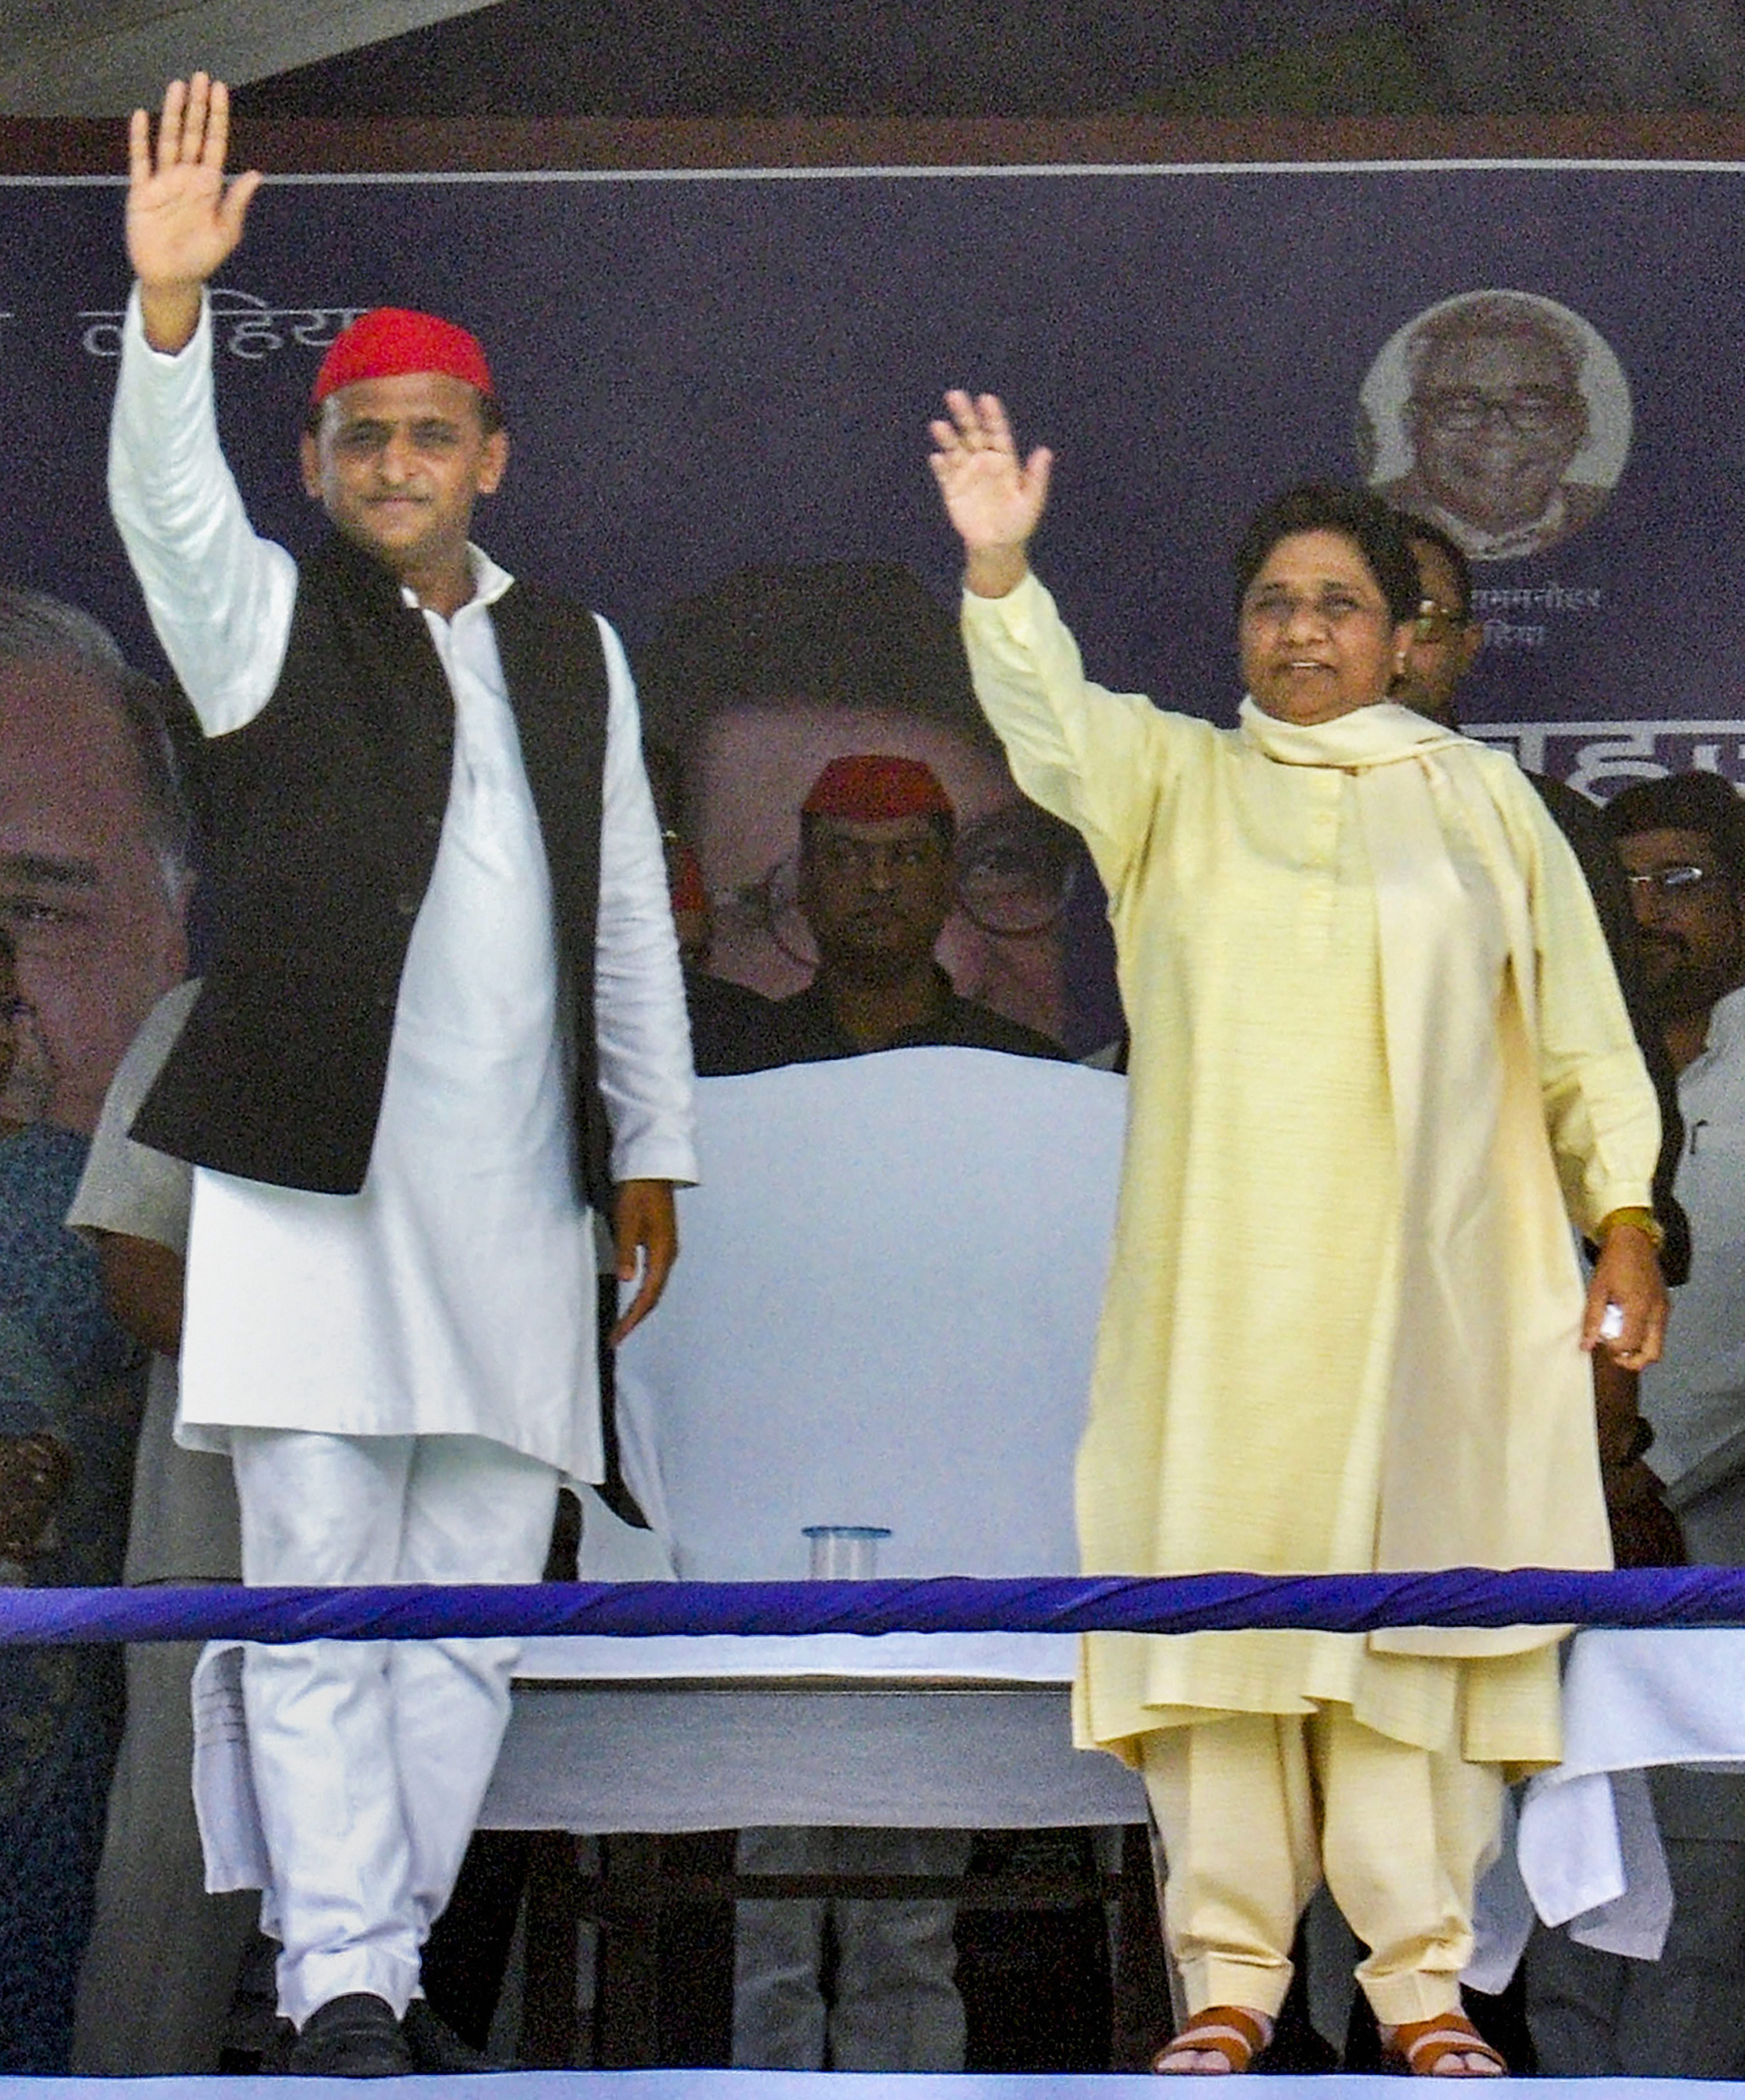 SP-BSP Rally - The Federal